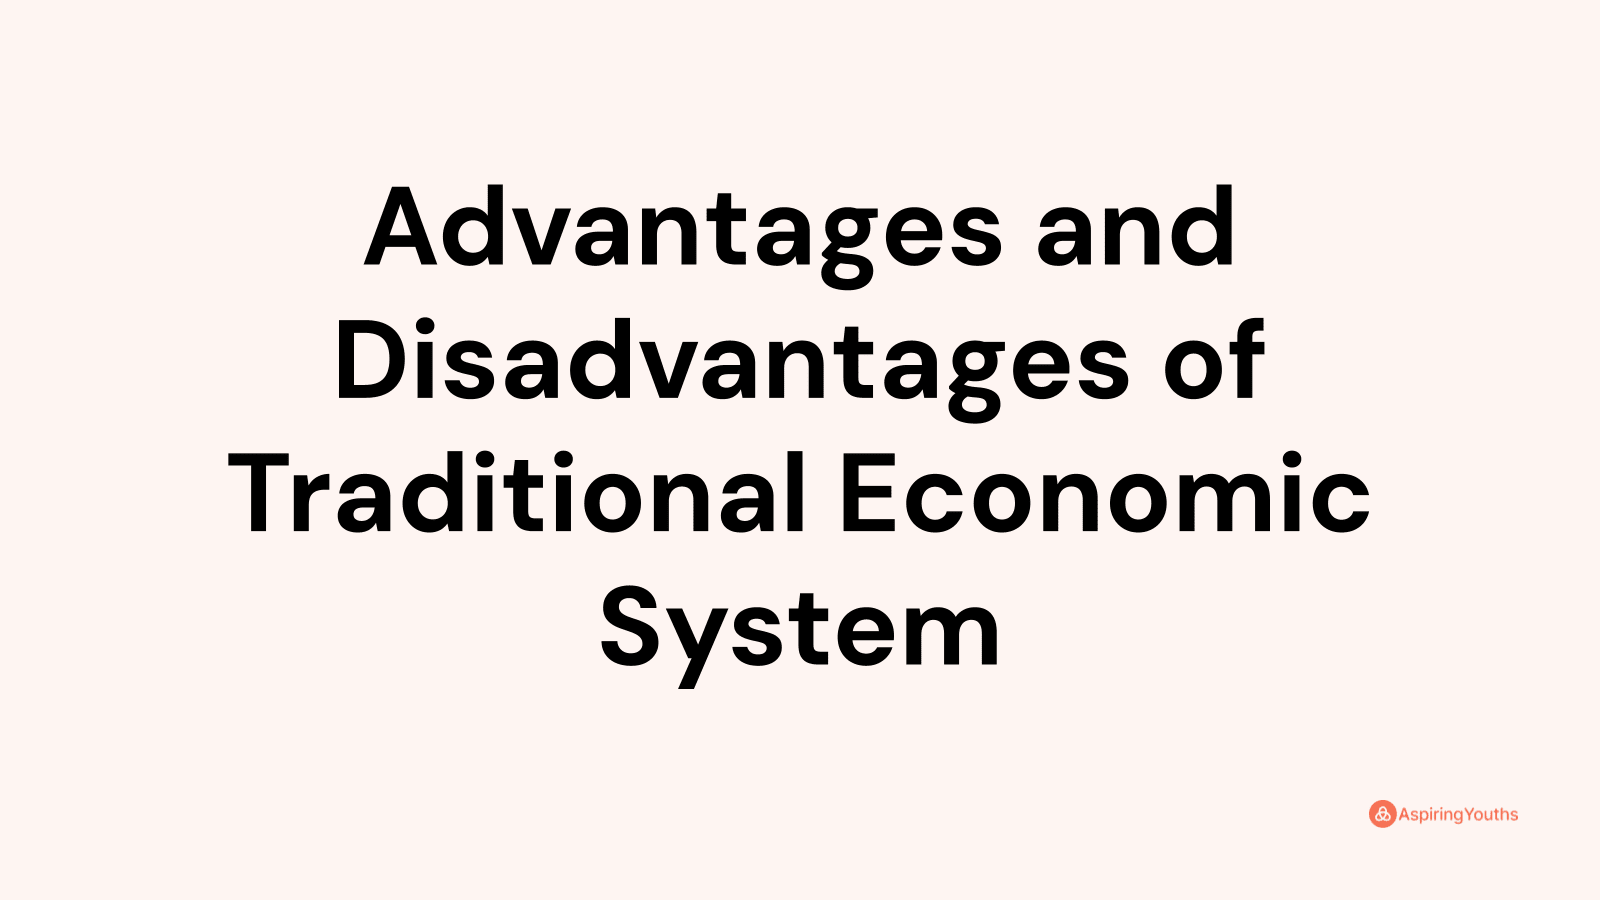 Advantages and disadvantages of Traditional Economic System